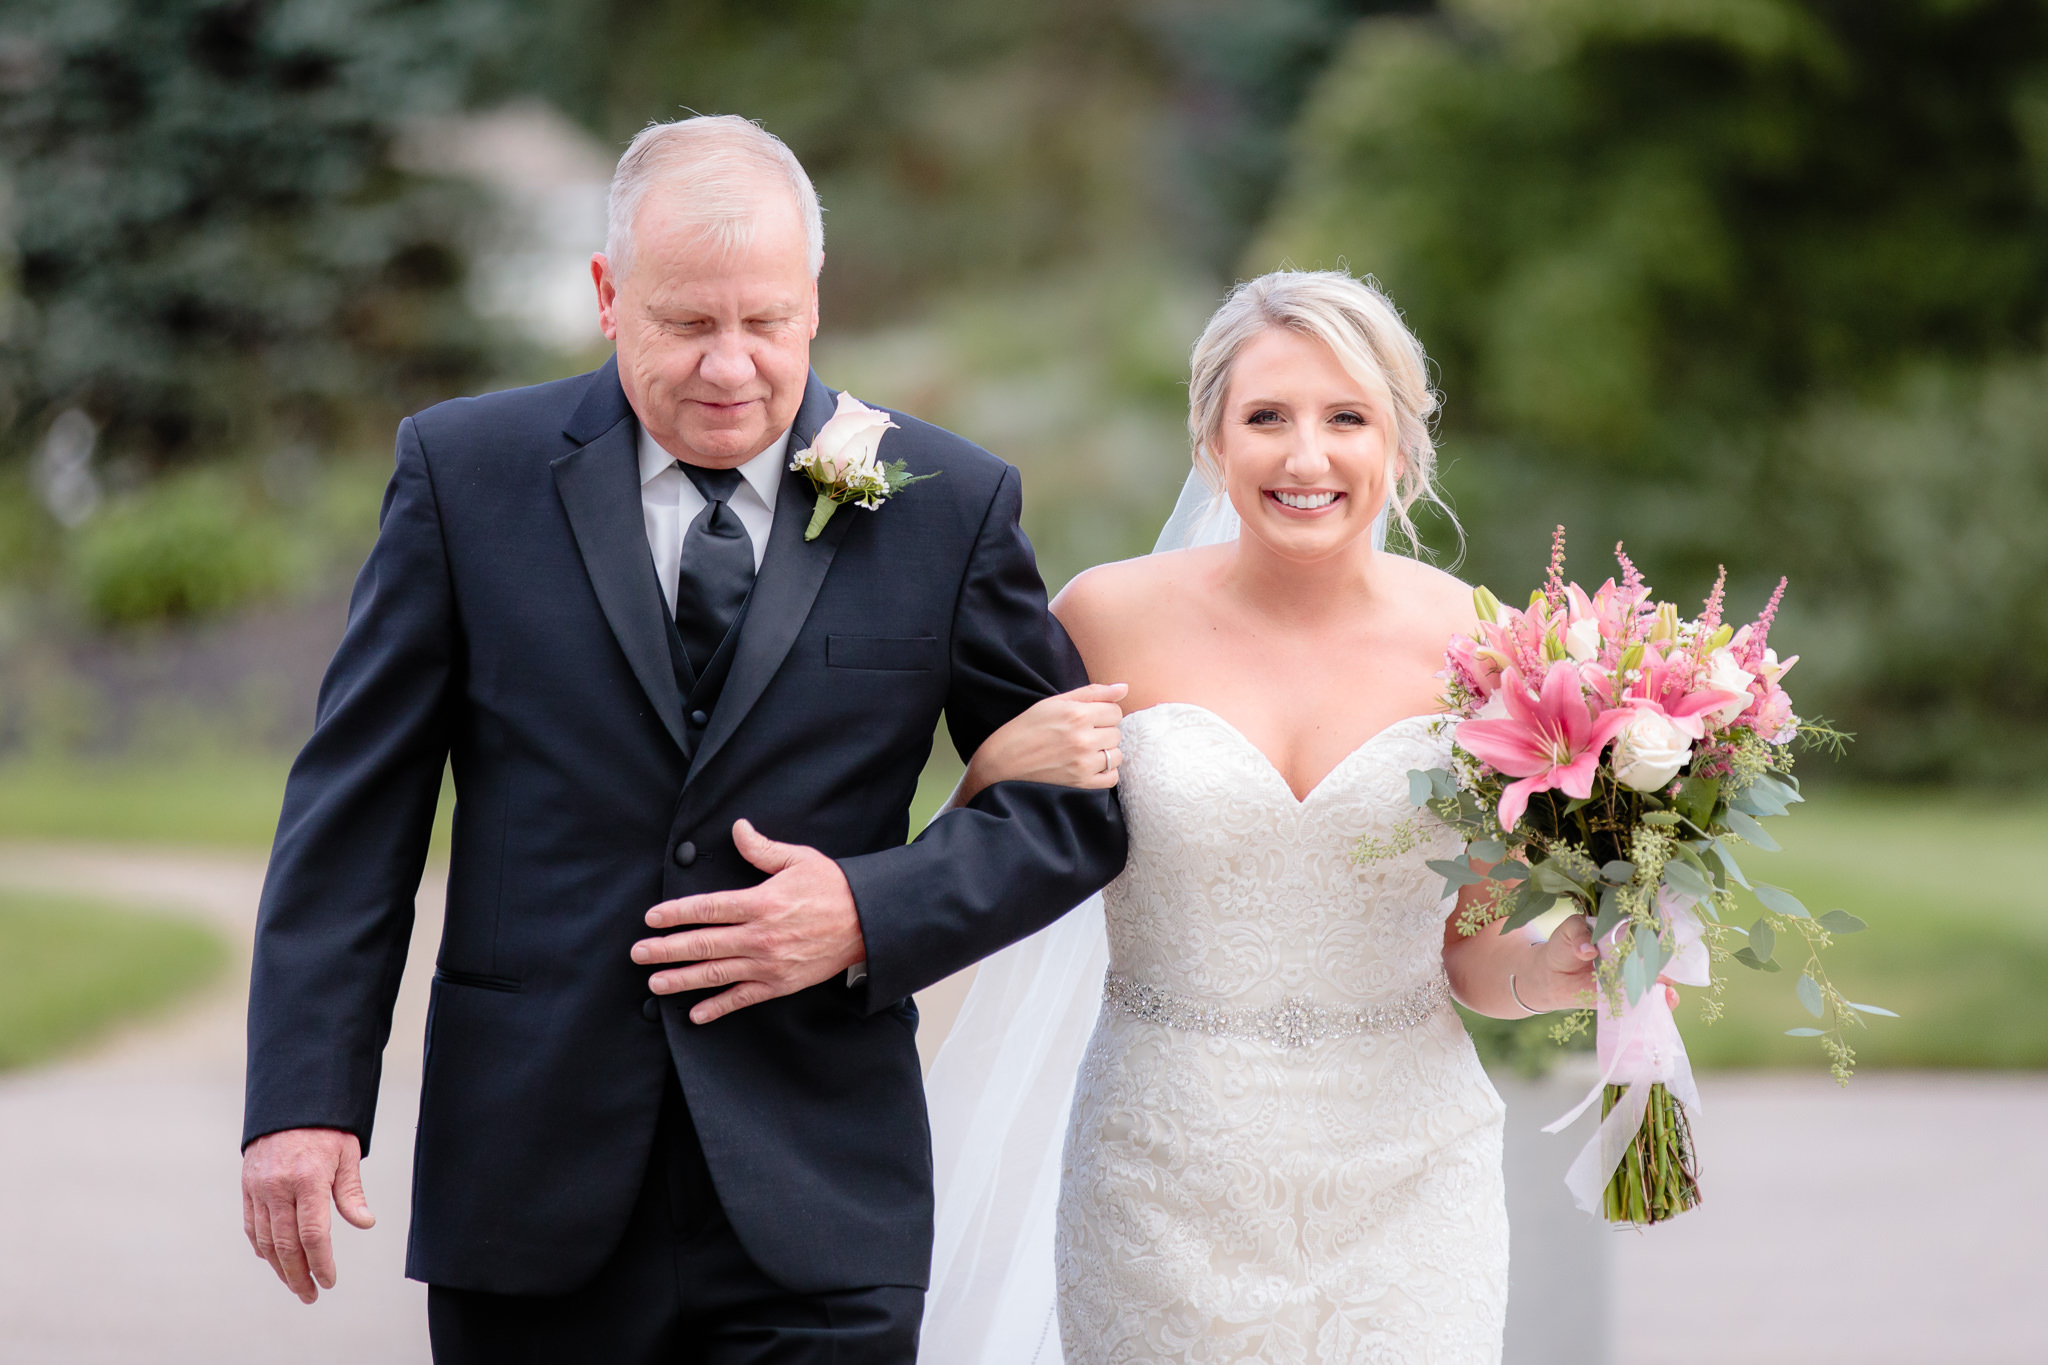 Bride smiles as her father walks her down the aisle at Greystone Fields